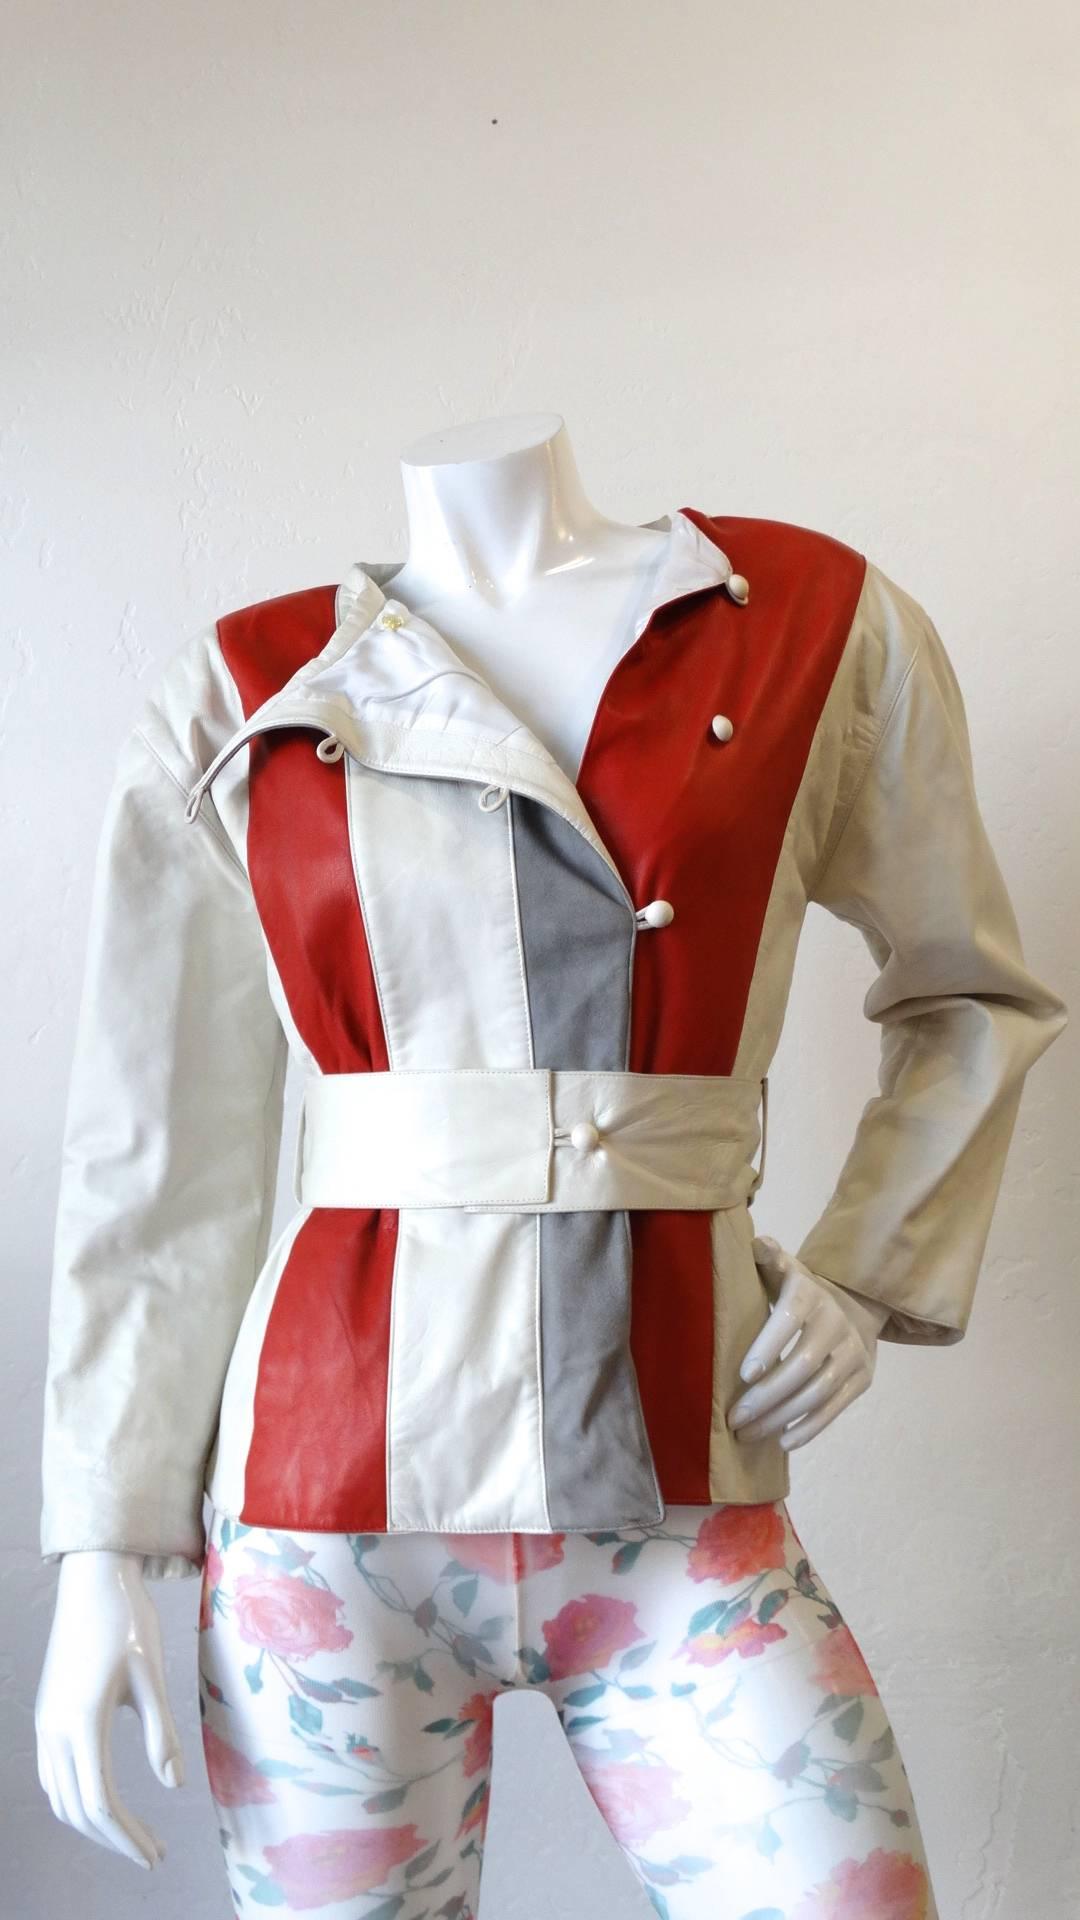 The most amazing mod inspired 1980s Courreges striped leather jacket! Made of a soft cream leather, accented with grey and red vertical stripes. Buttons up the side of the chest with white circular leather buttons. Waist cinches in perfectly with